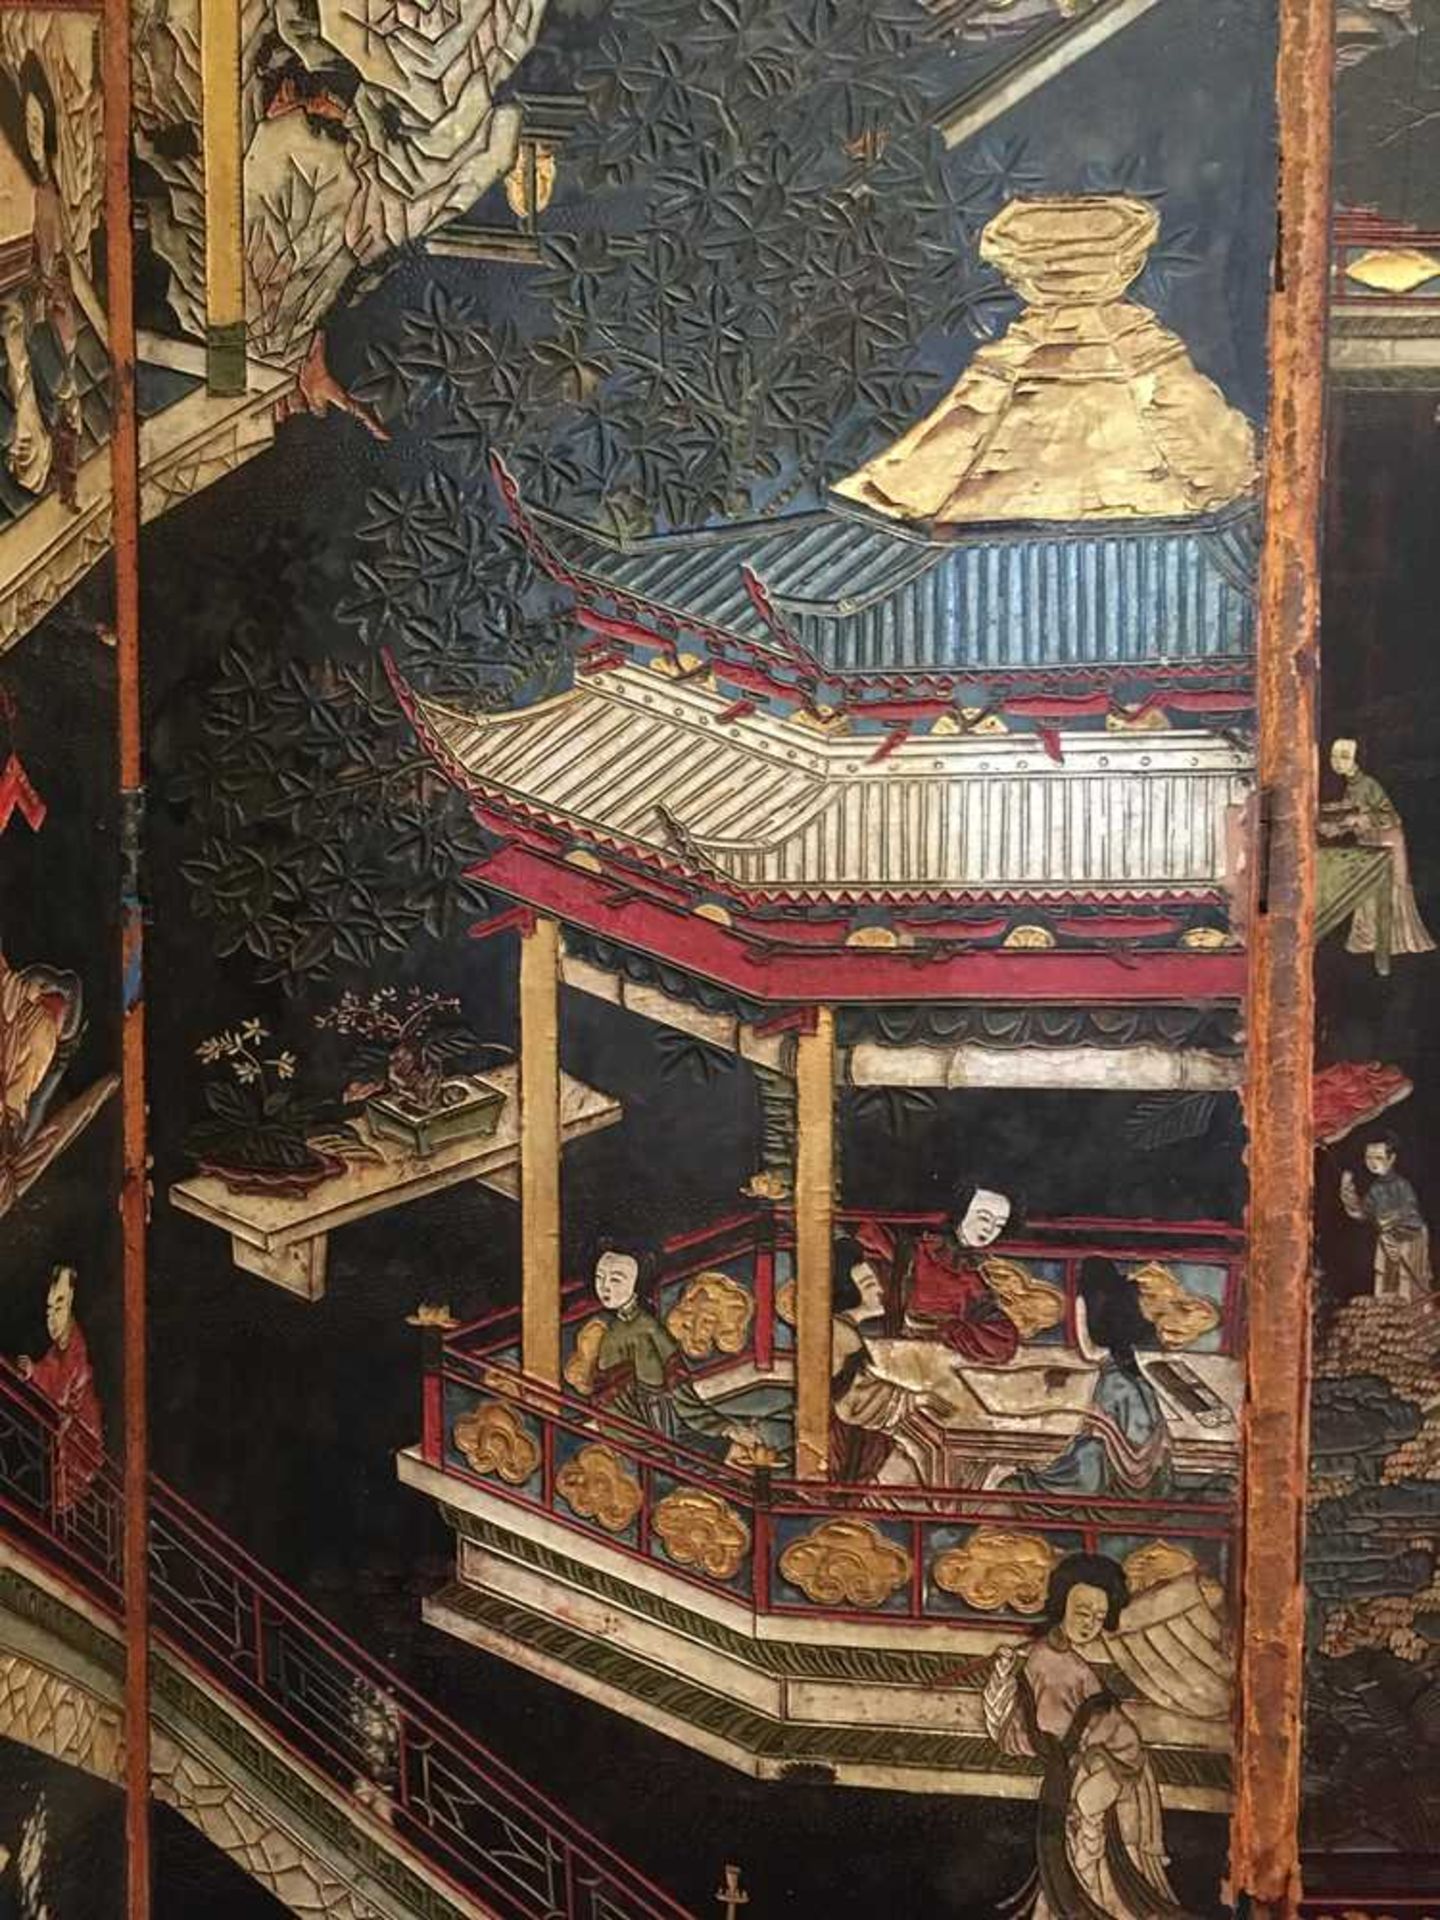 A CHINESE COROMANDEL BLACK LACQUER TWELVE-PANEL SCREEN QING DYNASTY, 18TH CENTURY - Image 19 of 72